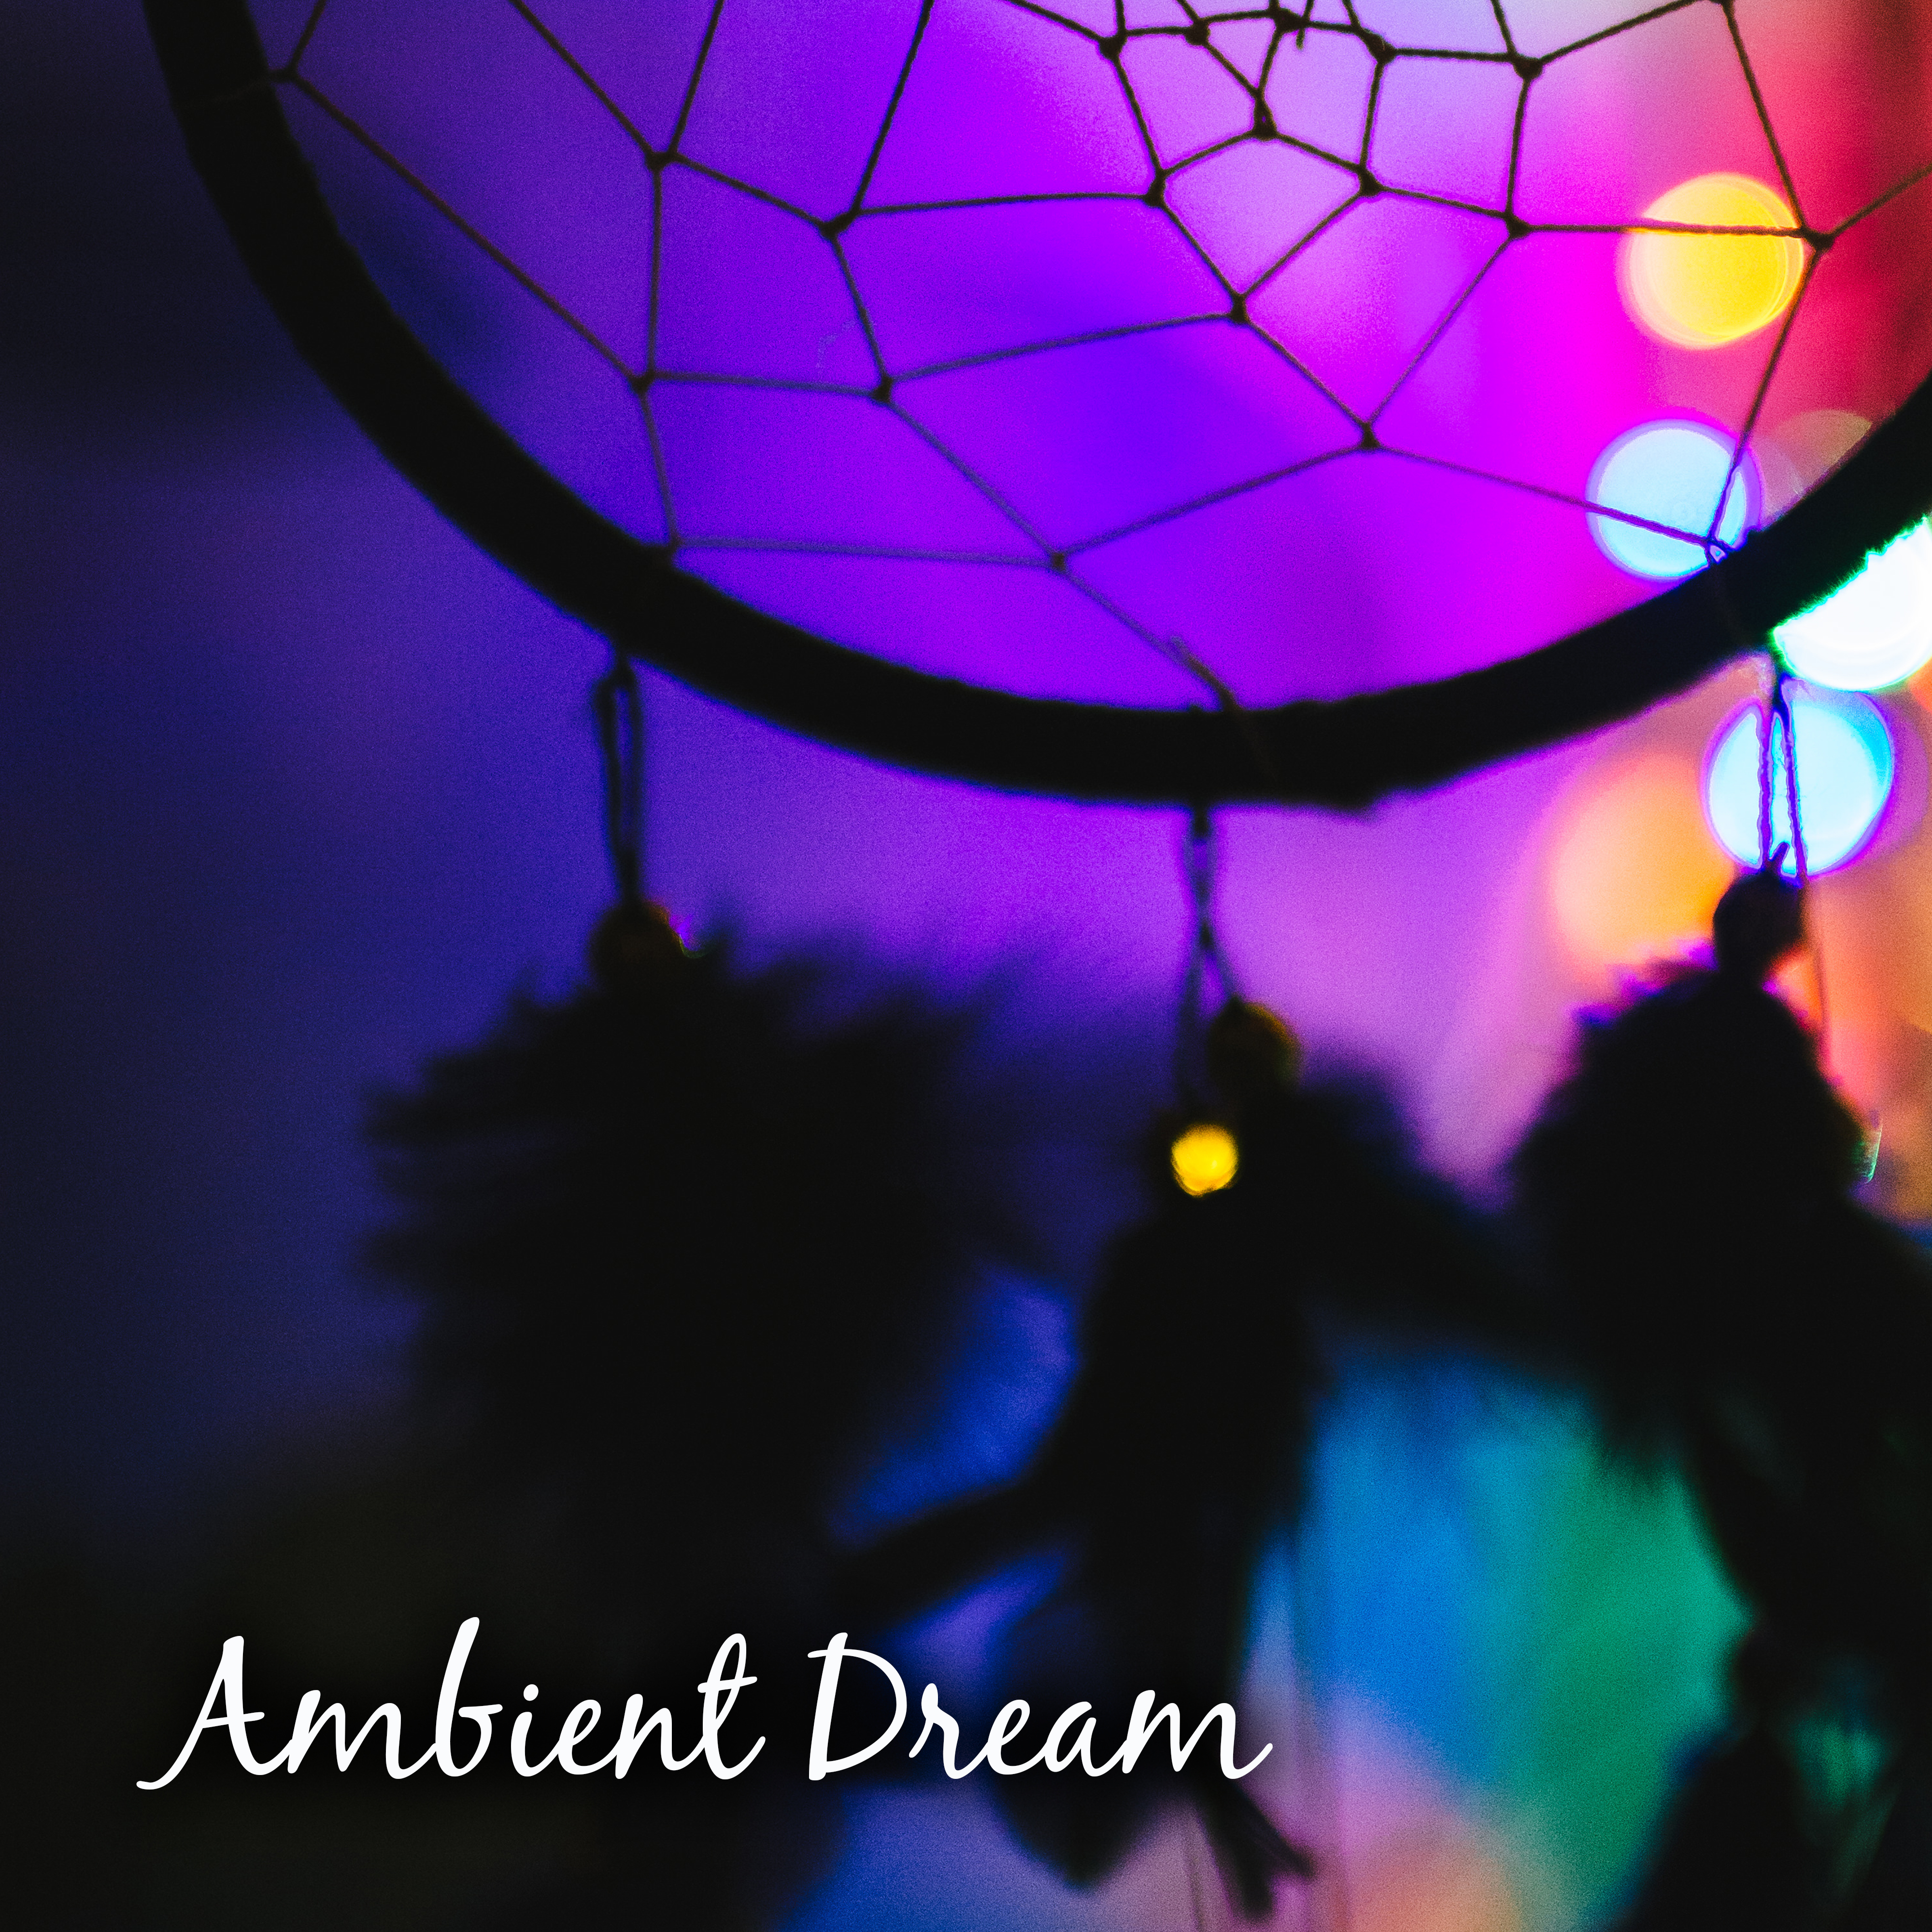 Ambient Dream – Soft Sounds for Sleep, Relaxation, Bedtime, Pure Mind, Restful Sleep, Sweet Melodies to Bed, Night Music